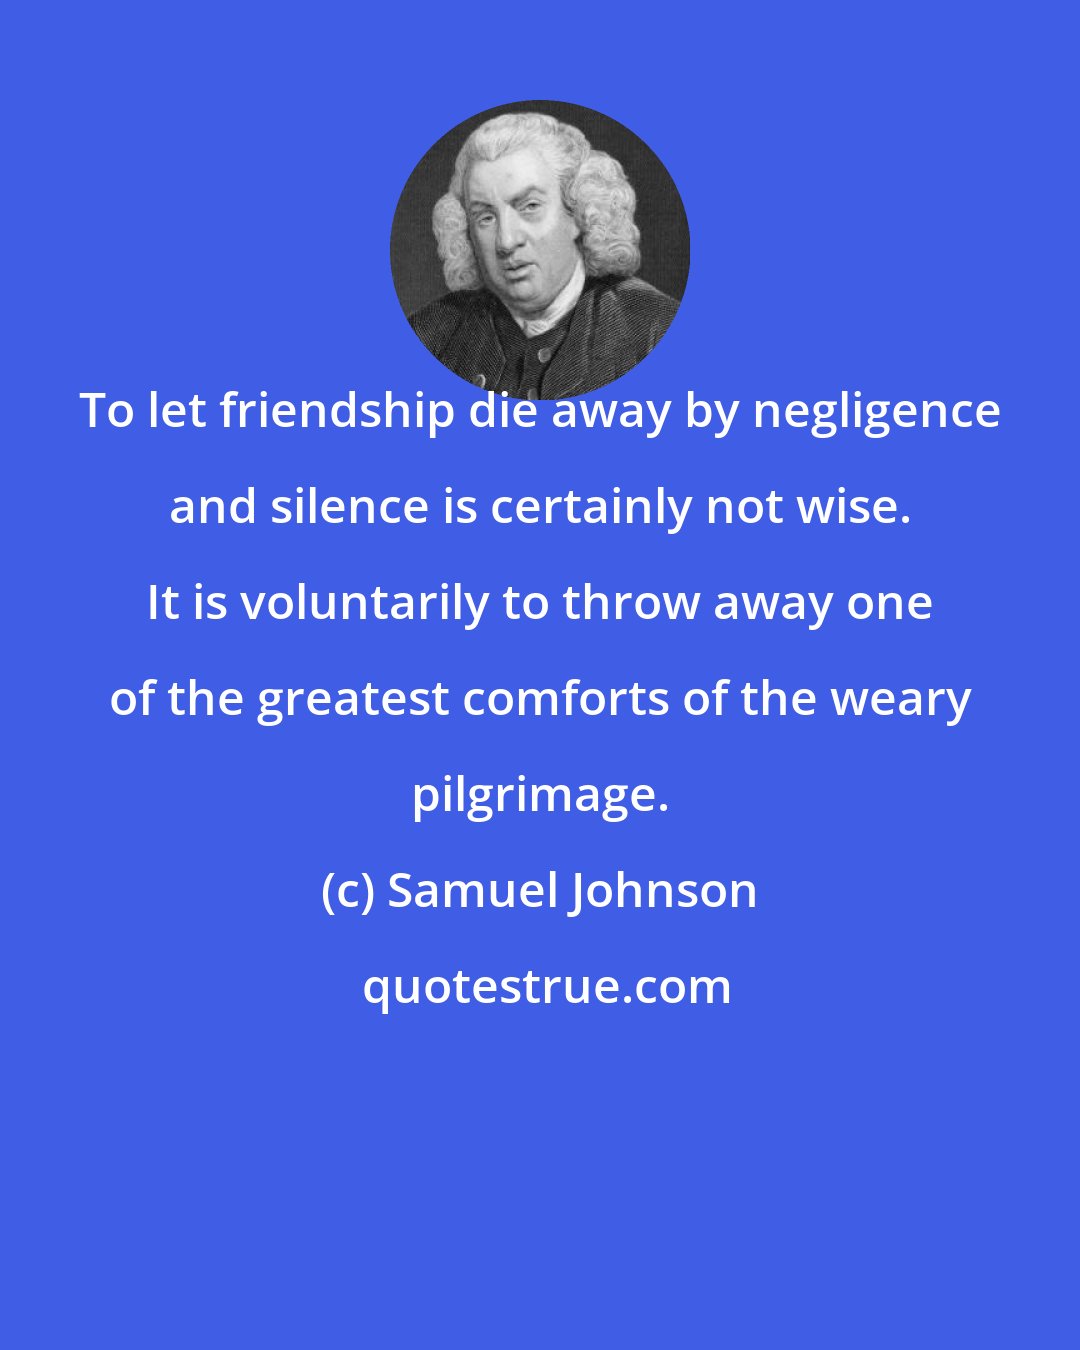 Samuel Johnson: To let friendship die away by negligence and silence is certainly not wise. It is voluntarily to throw away one of the greatest comforts of the weary pilgrimage.